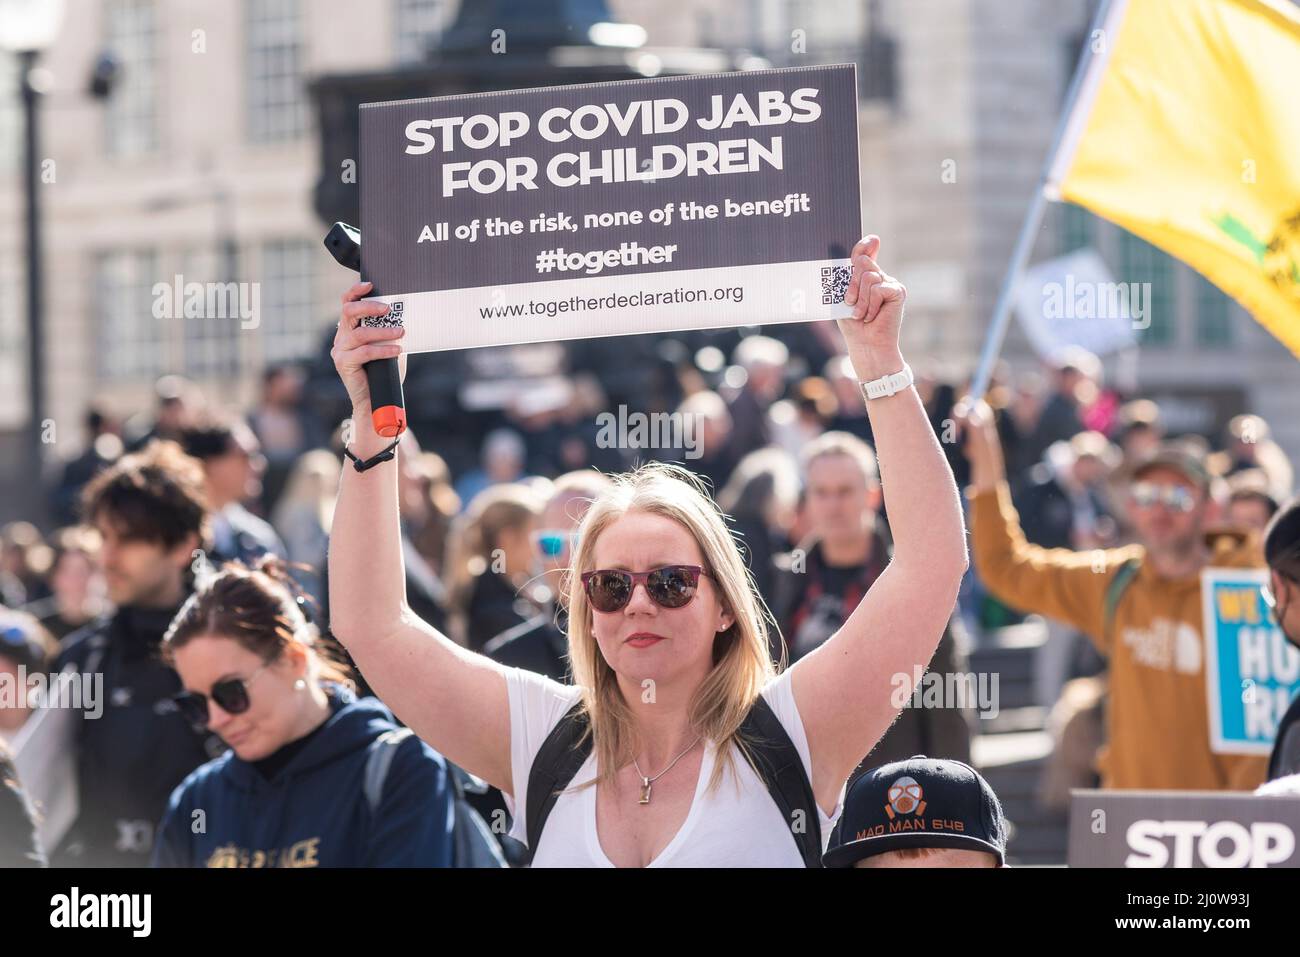 Protest taking place against vaccinating children for Covid 19, joined by anti-vaxxers. White, Caucasian female with placard Stock Photo